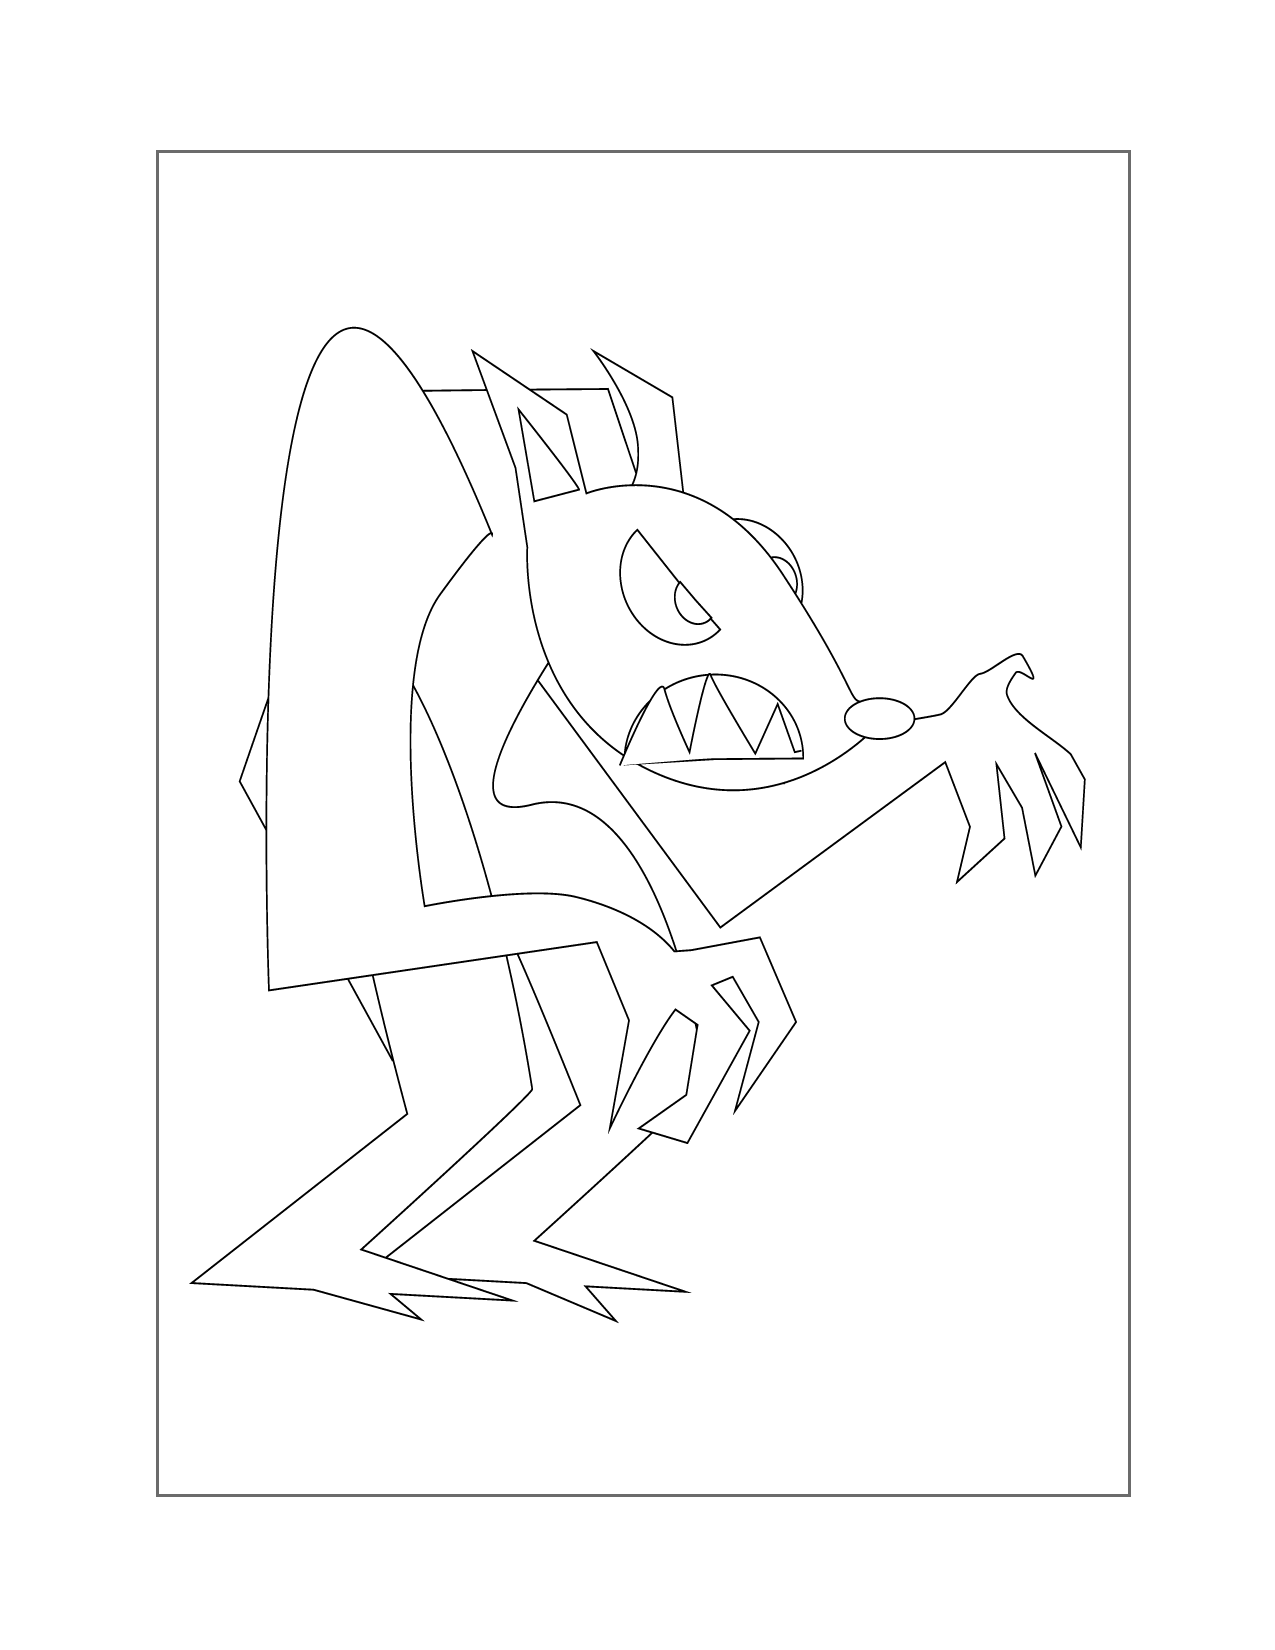 Werewolf Lineart Coloring Page